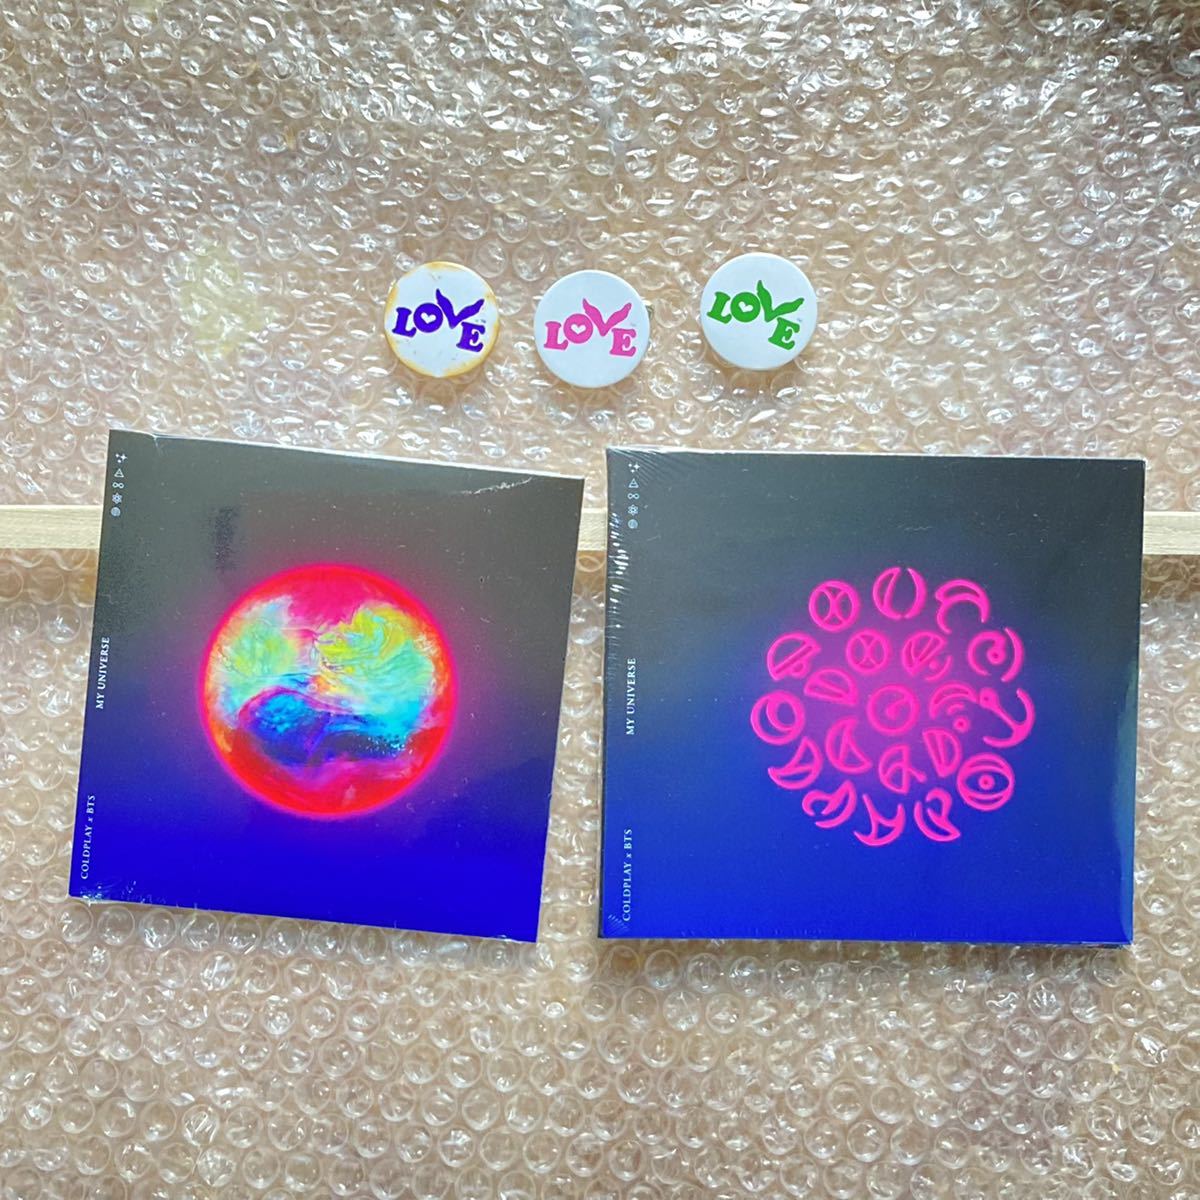 My Universe Coldplay x BTS CD 限定盤と通常盤 Love Button 缶バッジ JINセット 